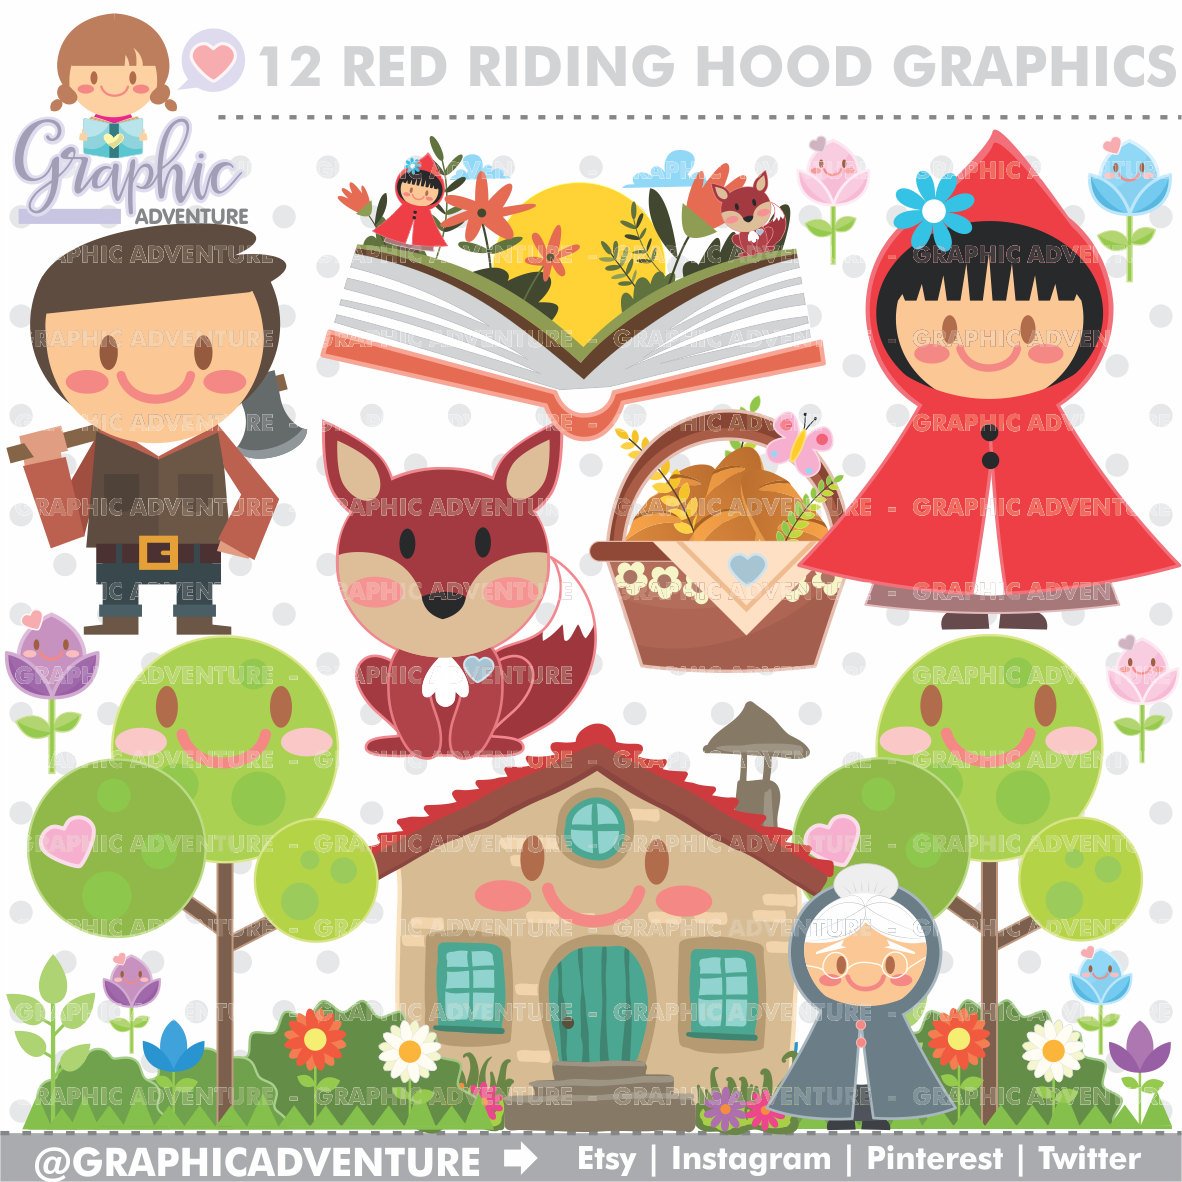 Graphicadventure 75 Off Red Riding Hood Clipart Little Red Riding Hood Graphic Commercial Use Kawaii Clipart Red Riding Hood Party Planner Accessories T Co Bymkacilwa T Co Oinzaghcm8